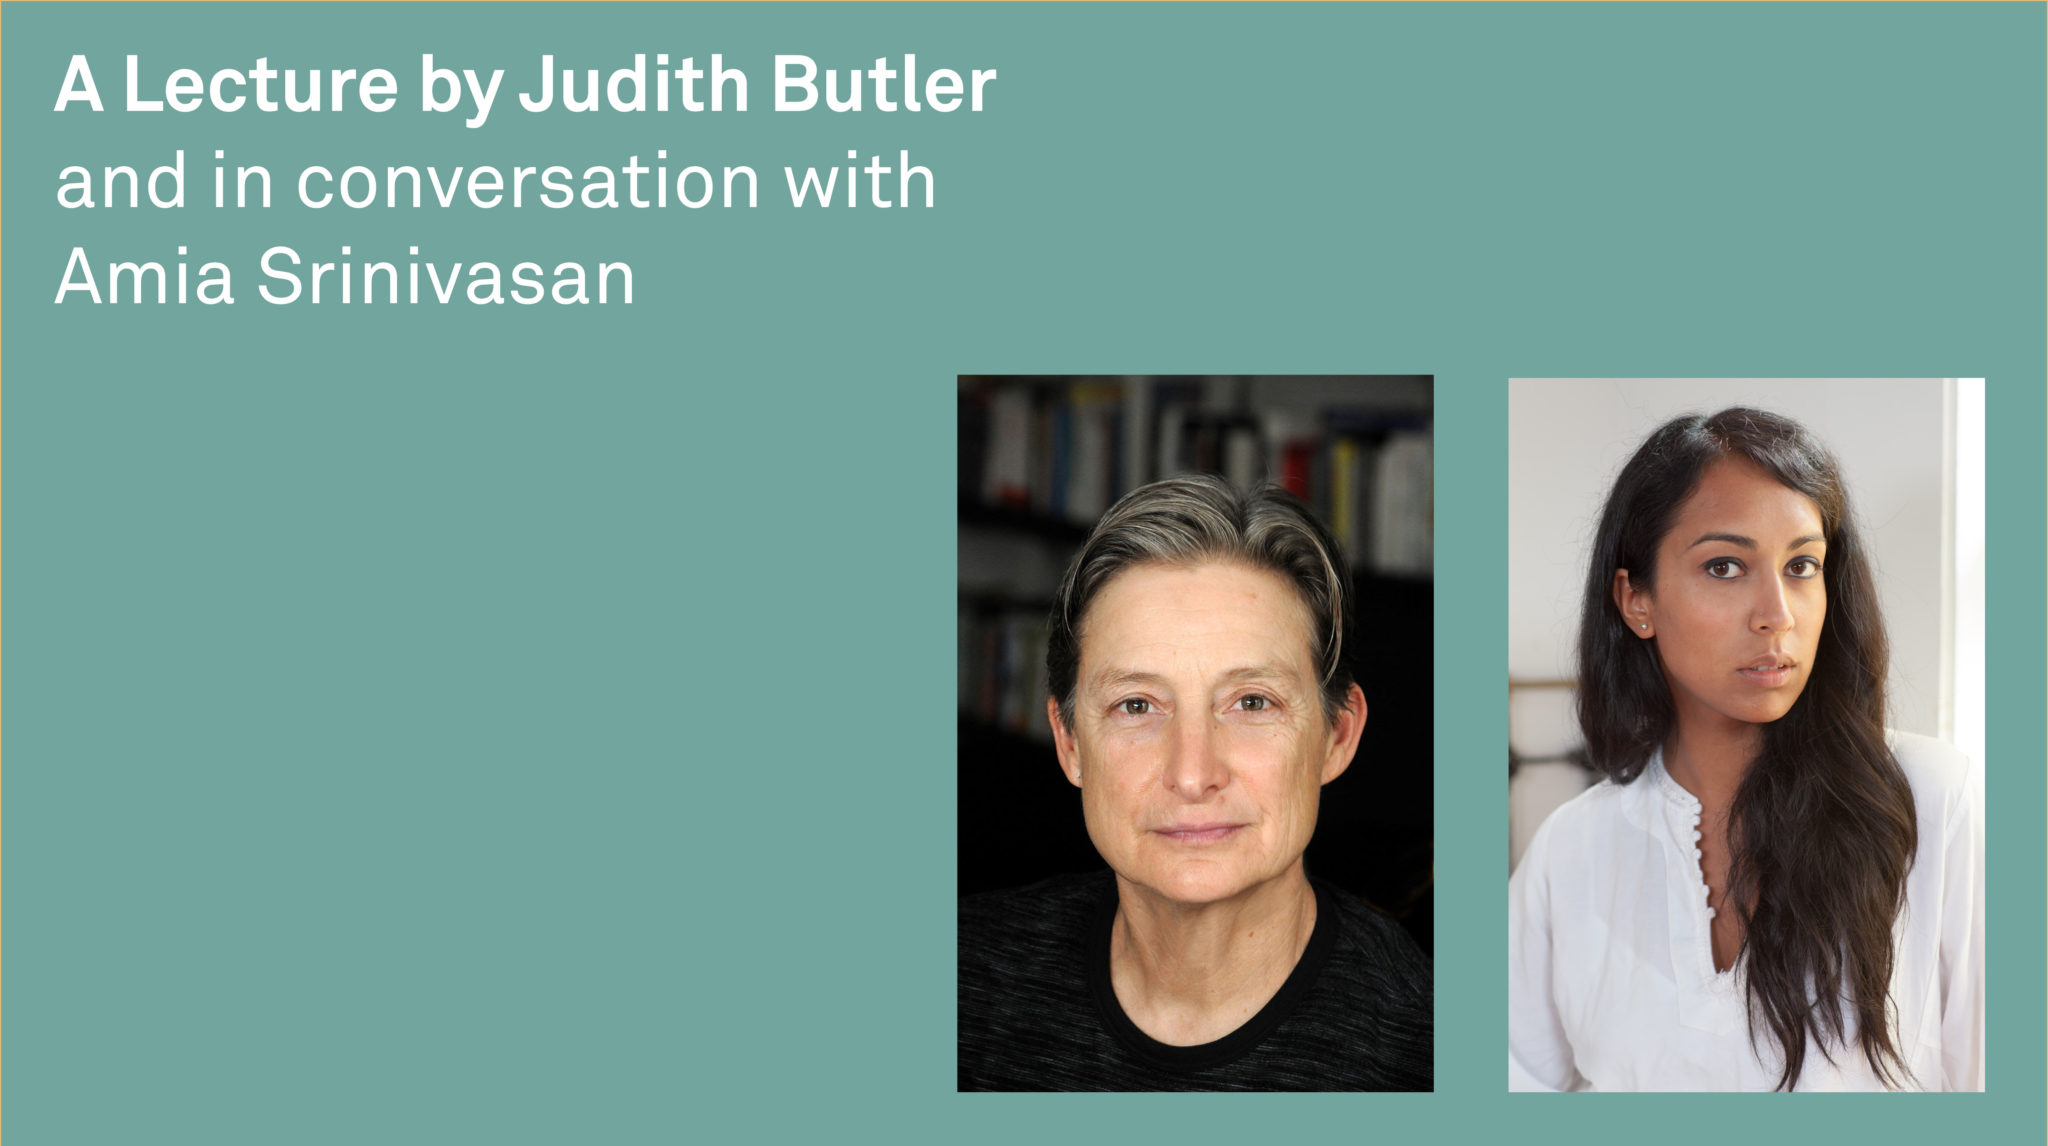 judith butler performative acts summary